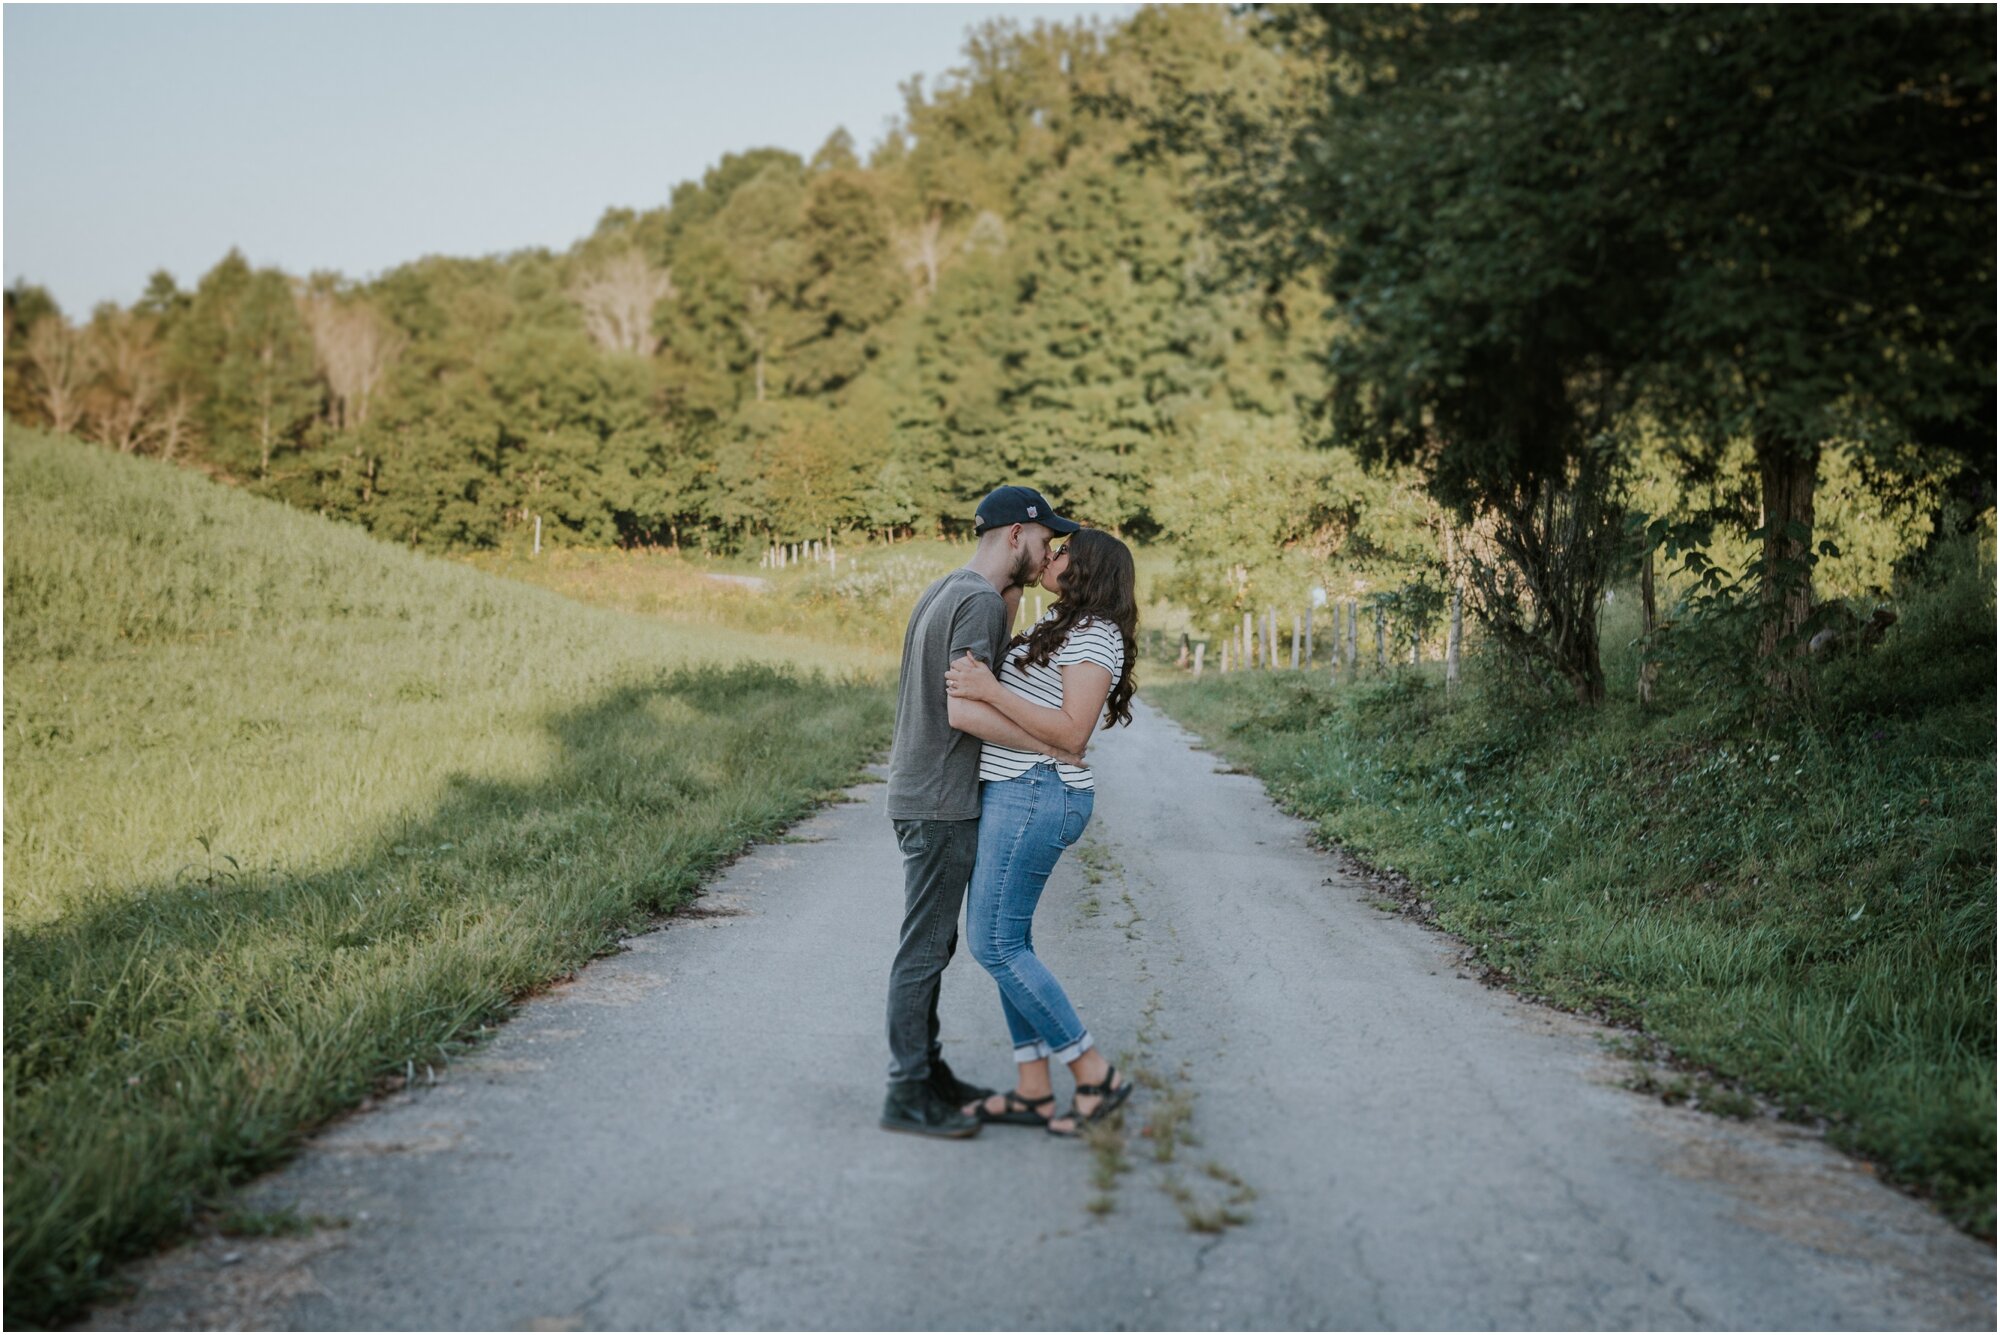 kingsport-tennessee-backyard-pond-bays-mountain-summer-engagement-session_0003.jpg